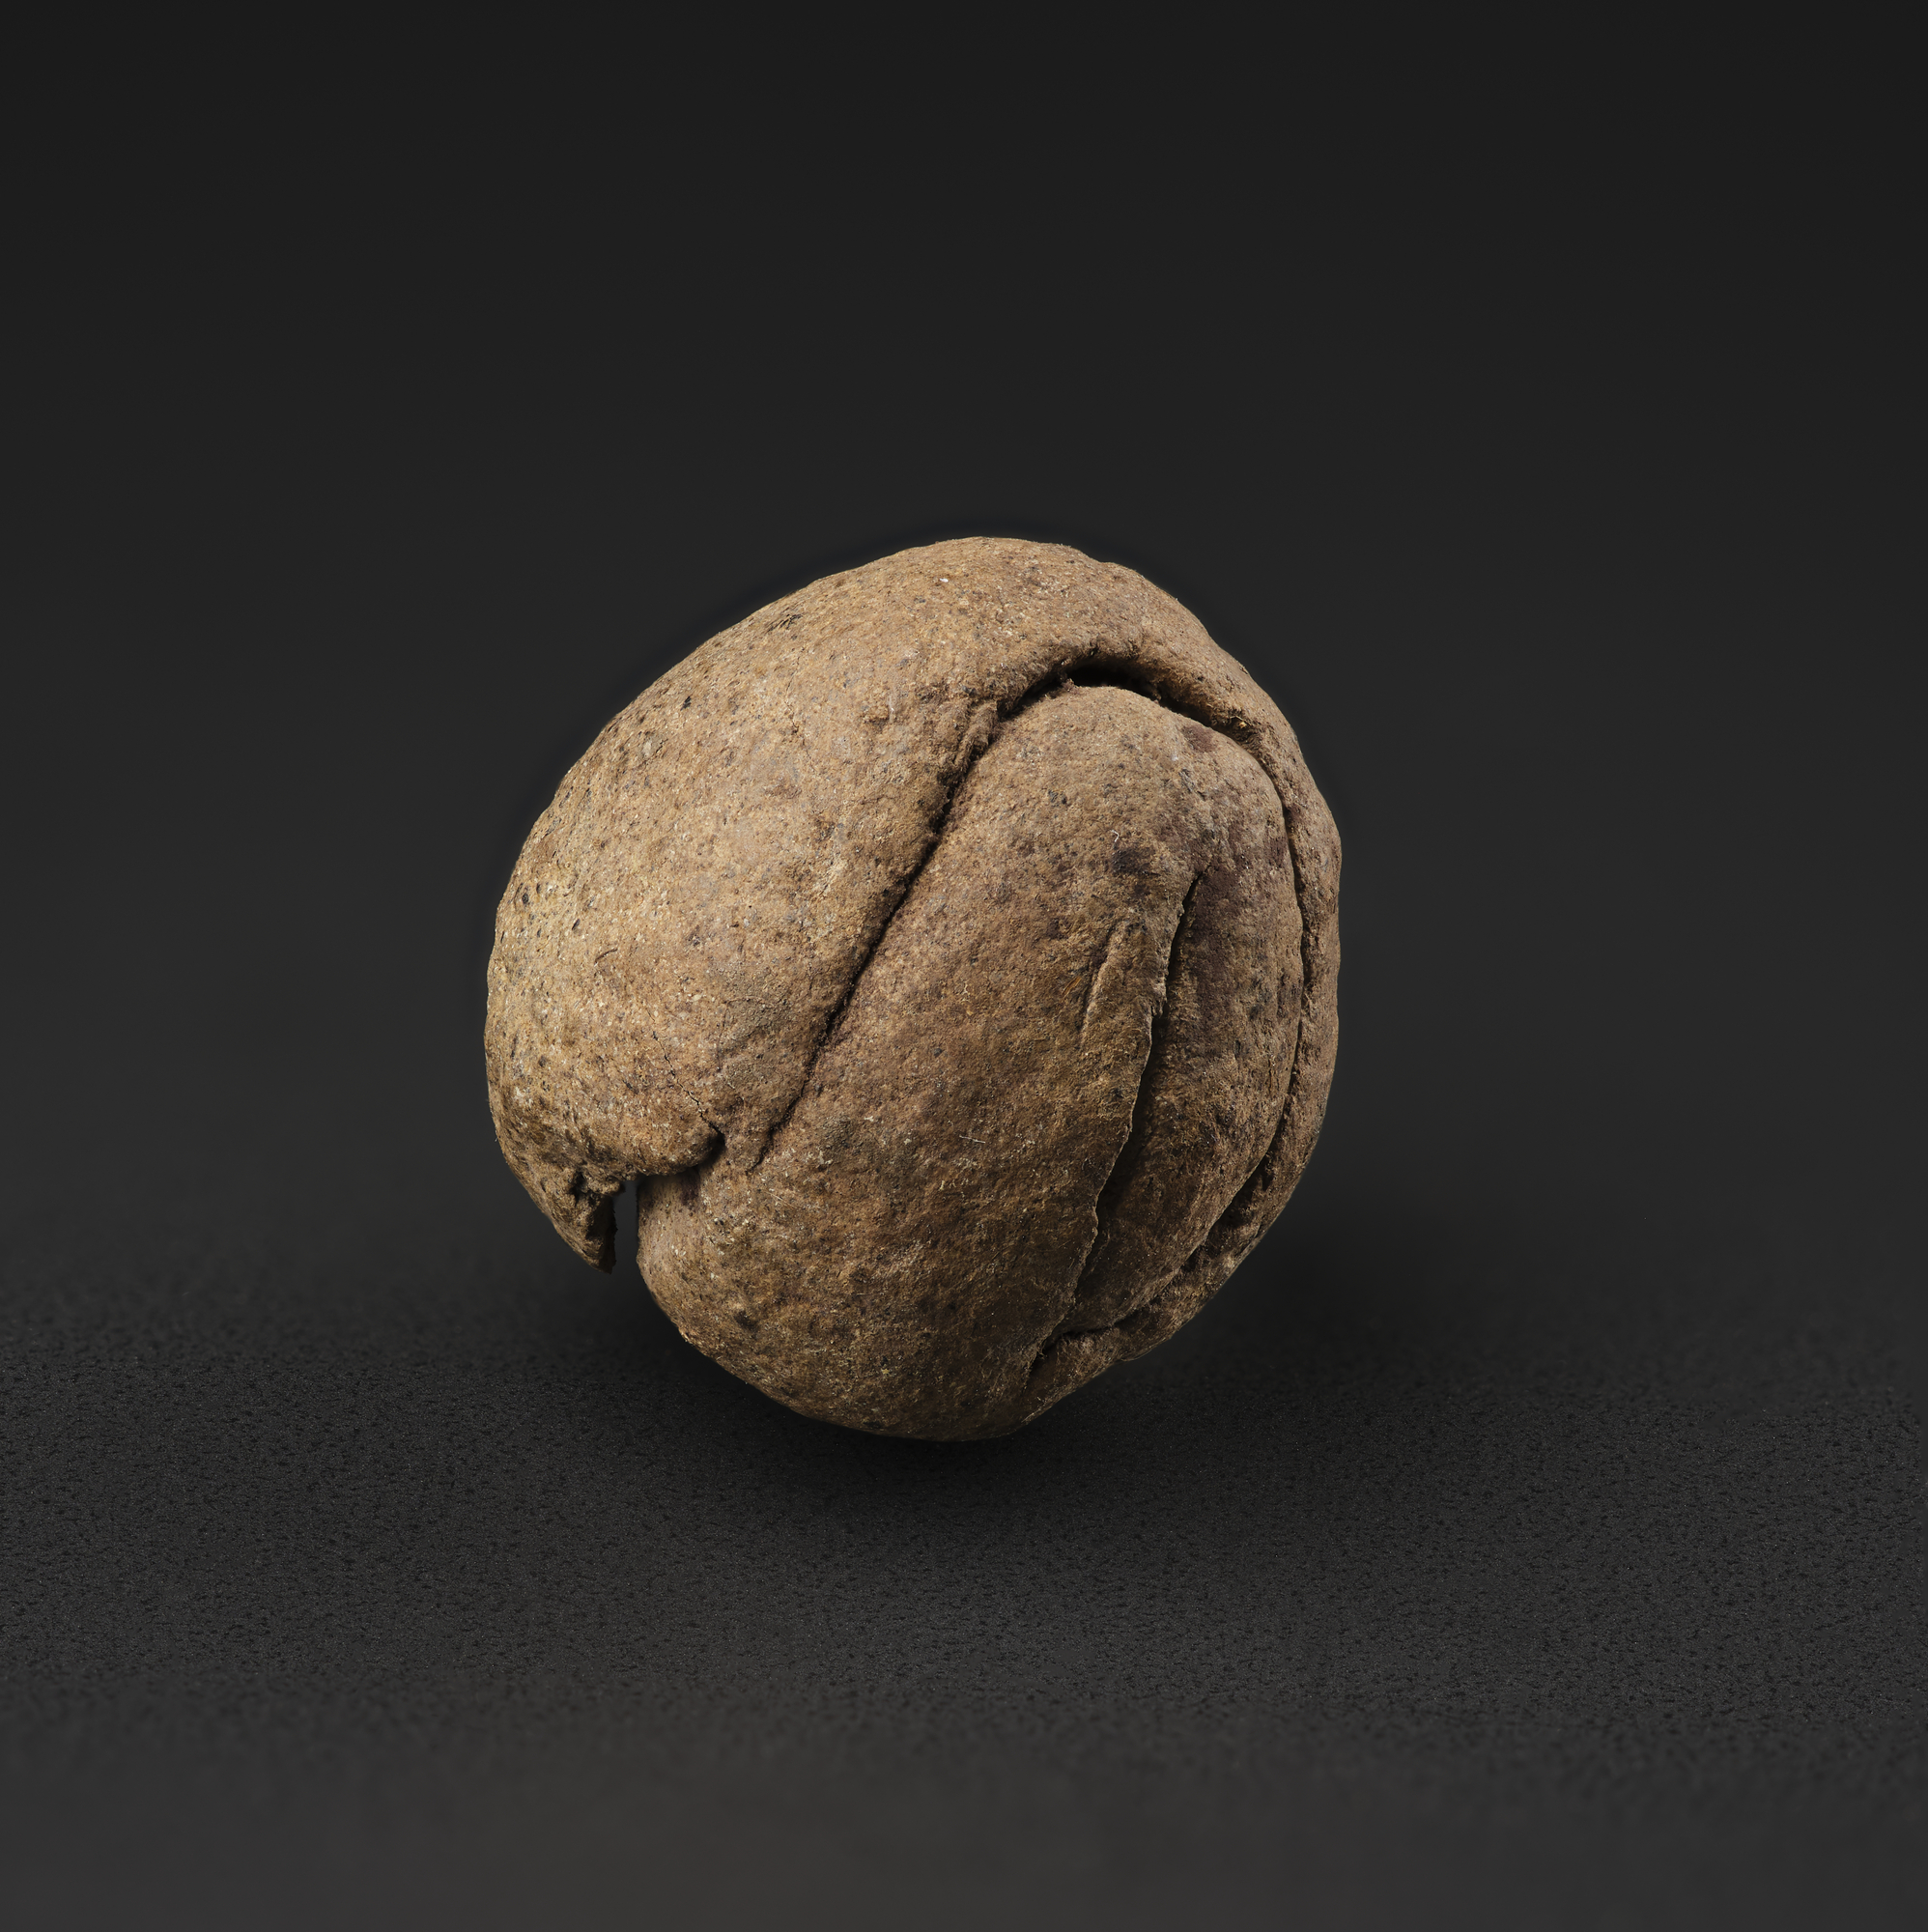 Image of Dirt-ball, from the Viking age Galloway Hoard © National Museums Scotland